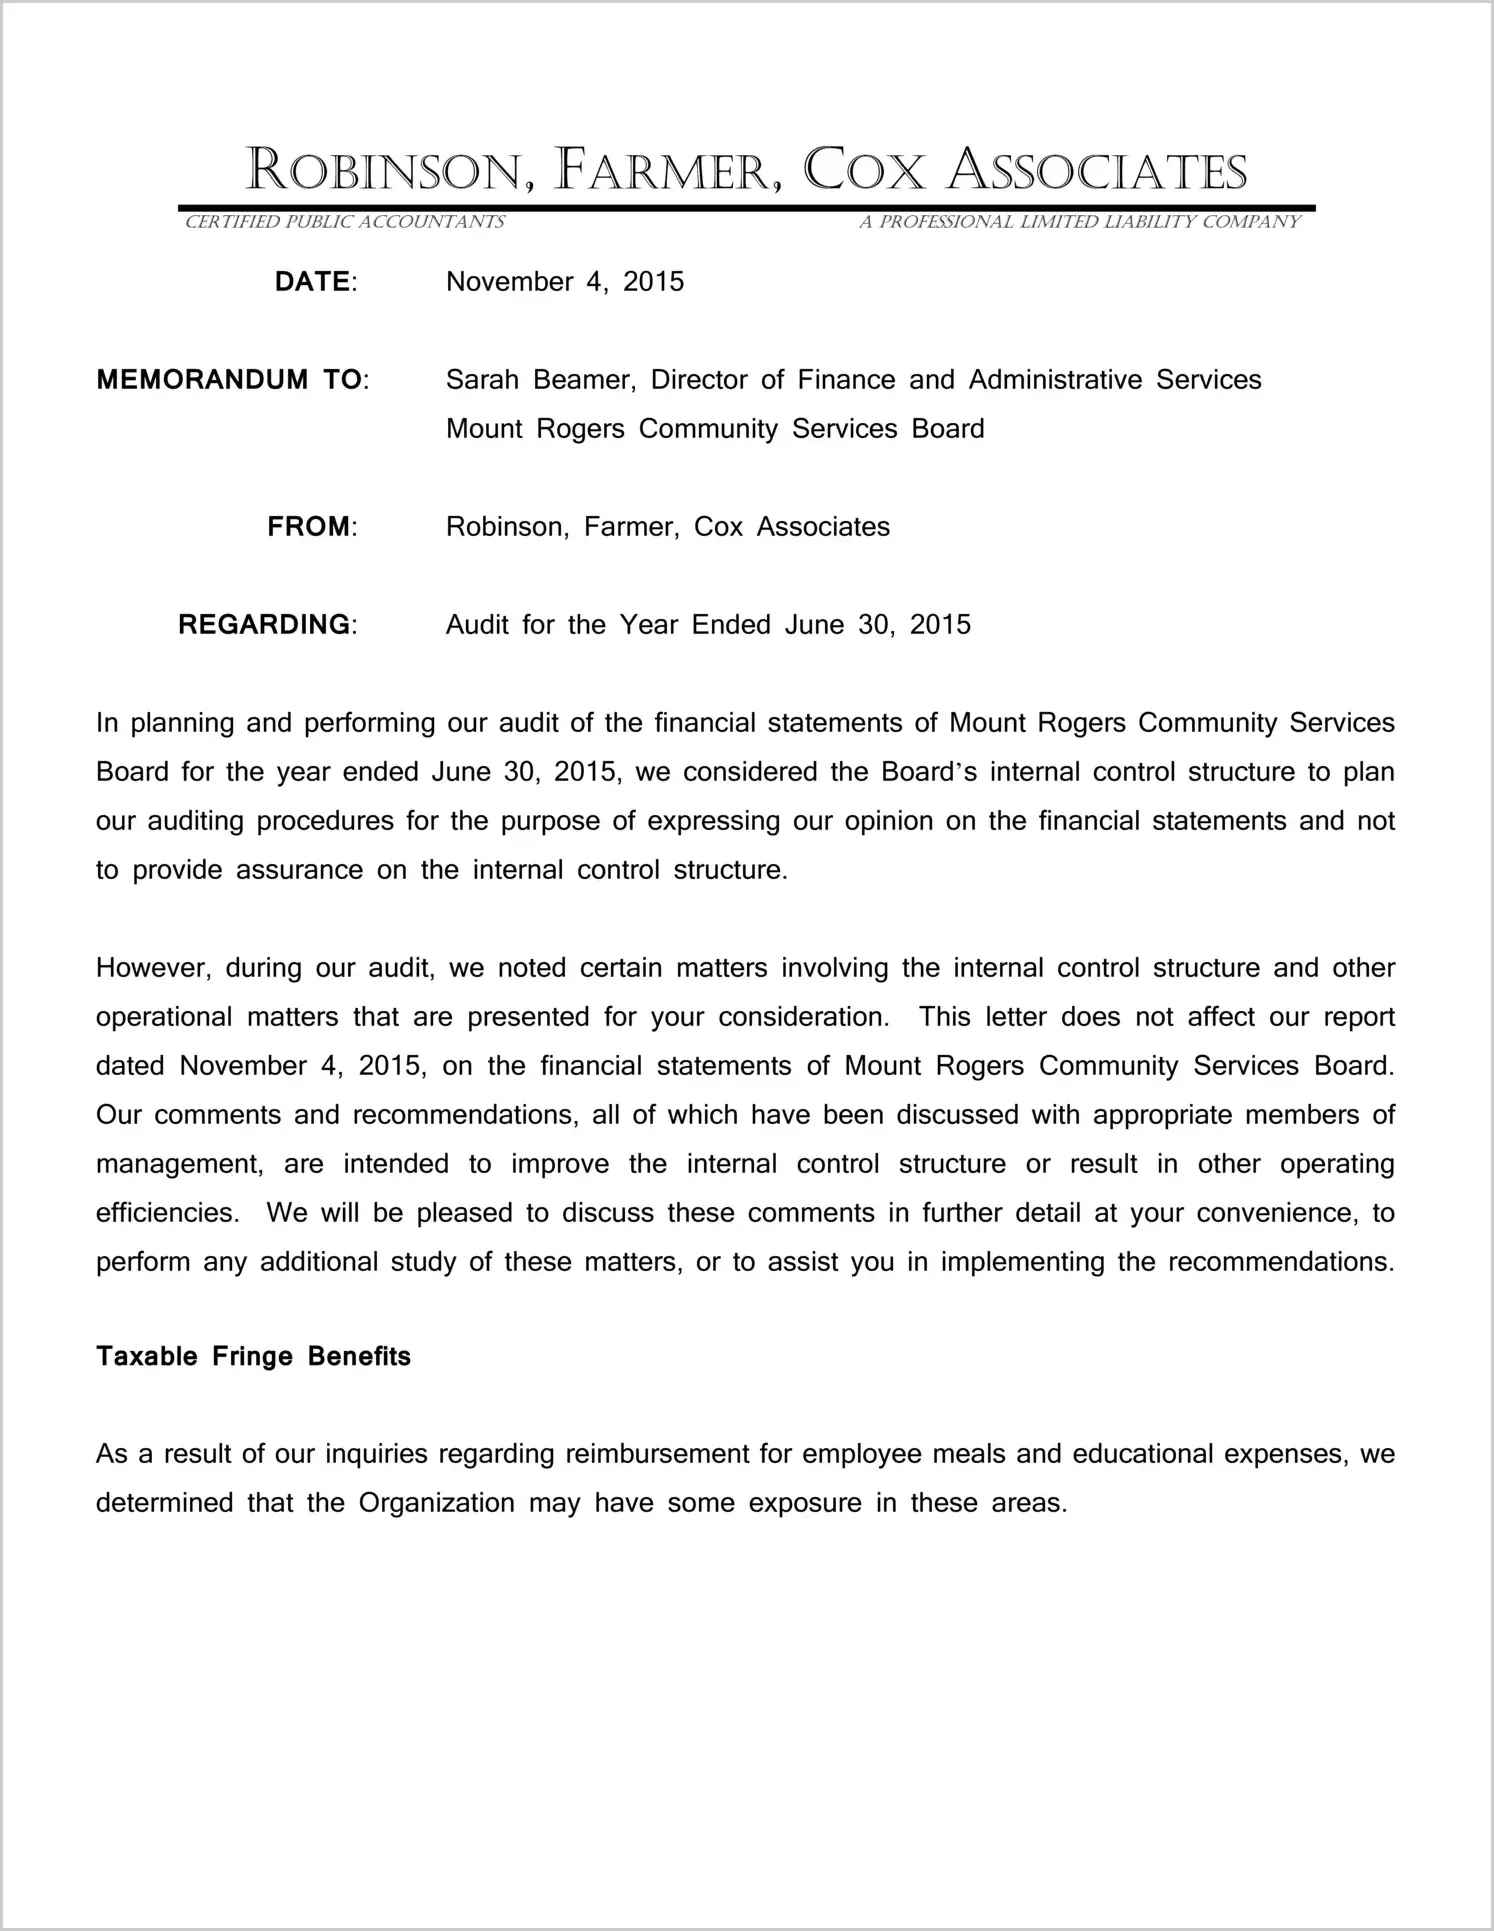 2015 ABC/Other Management Letter for Mount Rogers Community Services Board